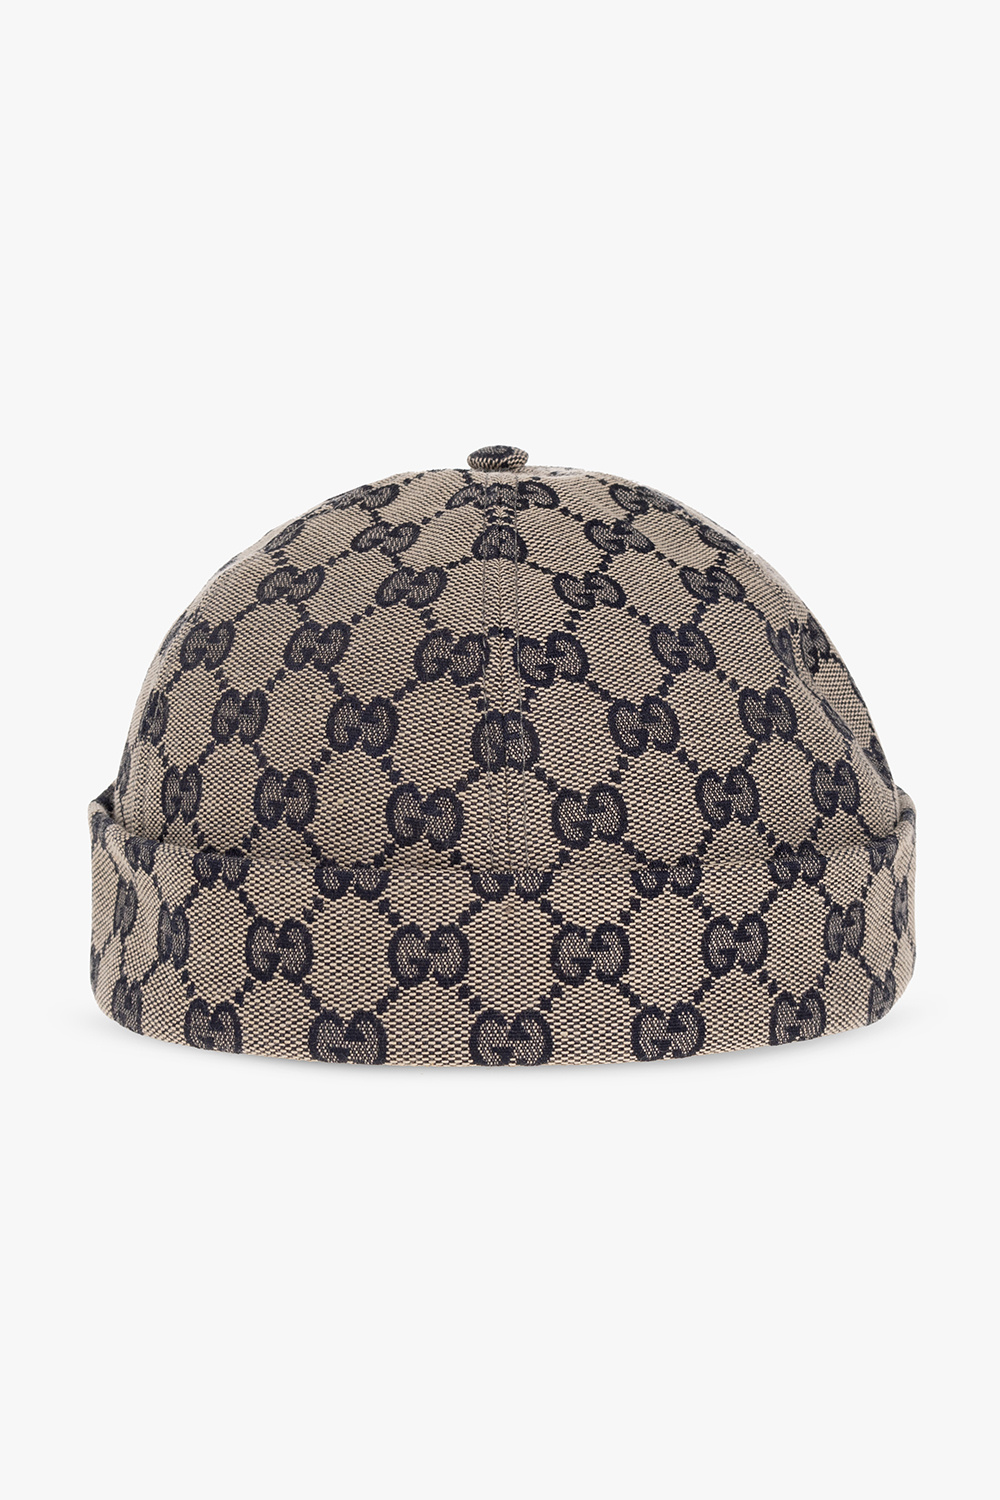 Gucci, Accessories, Original Gg Canvas Baseball Hat With Web Only Warn  Once